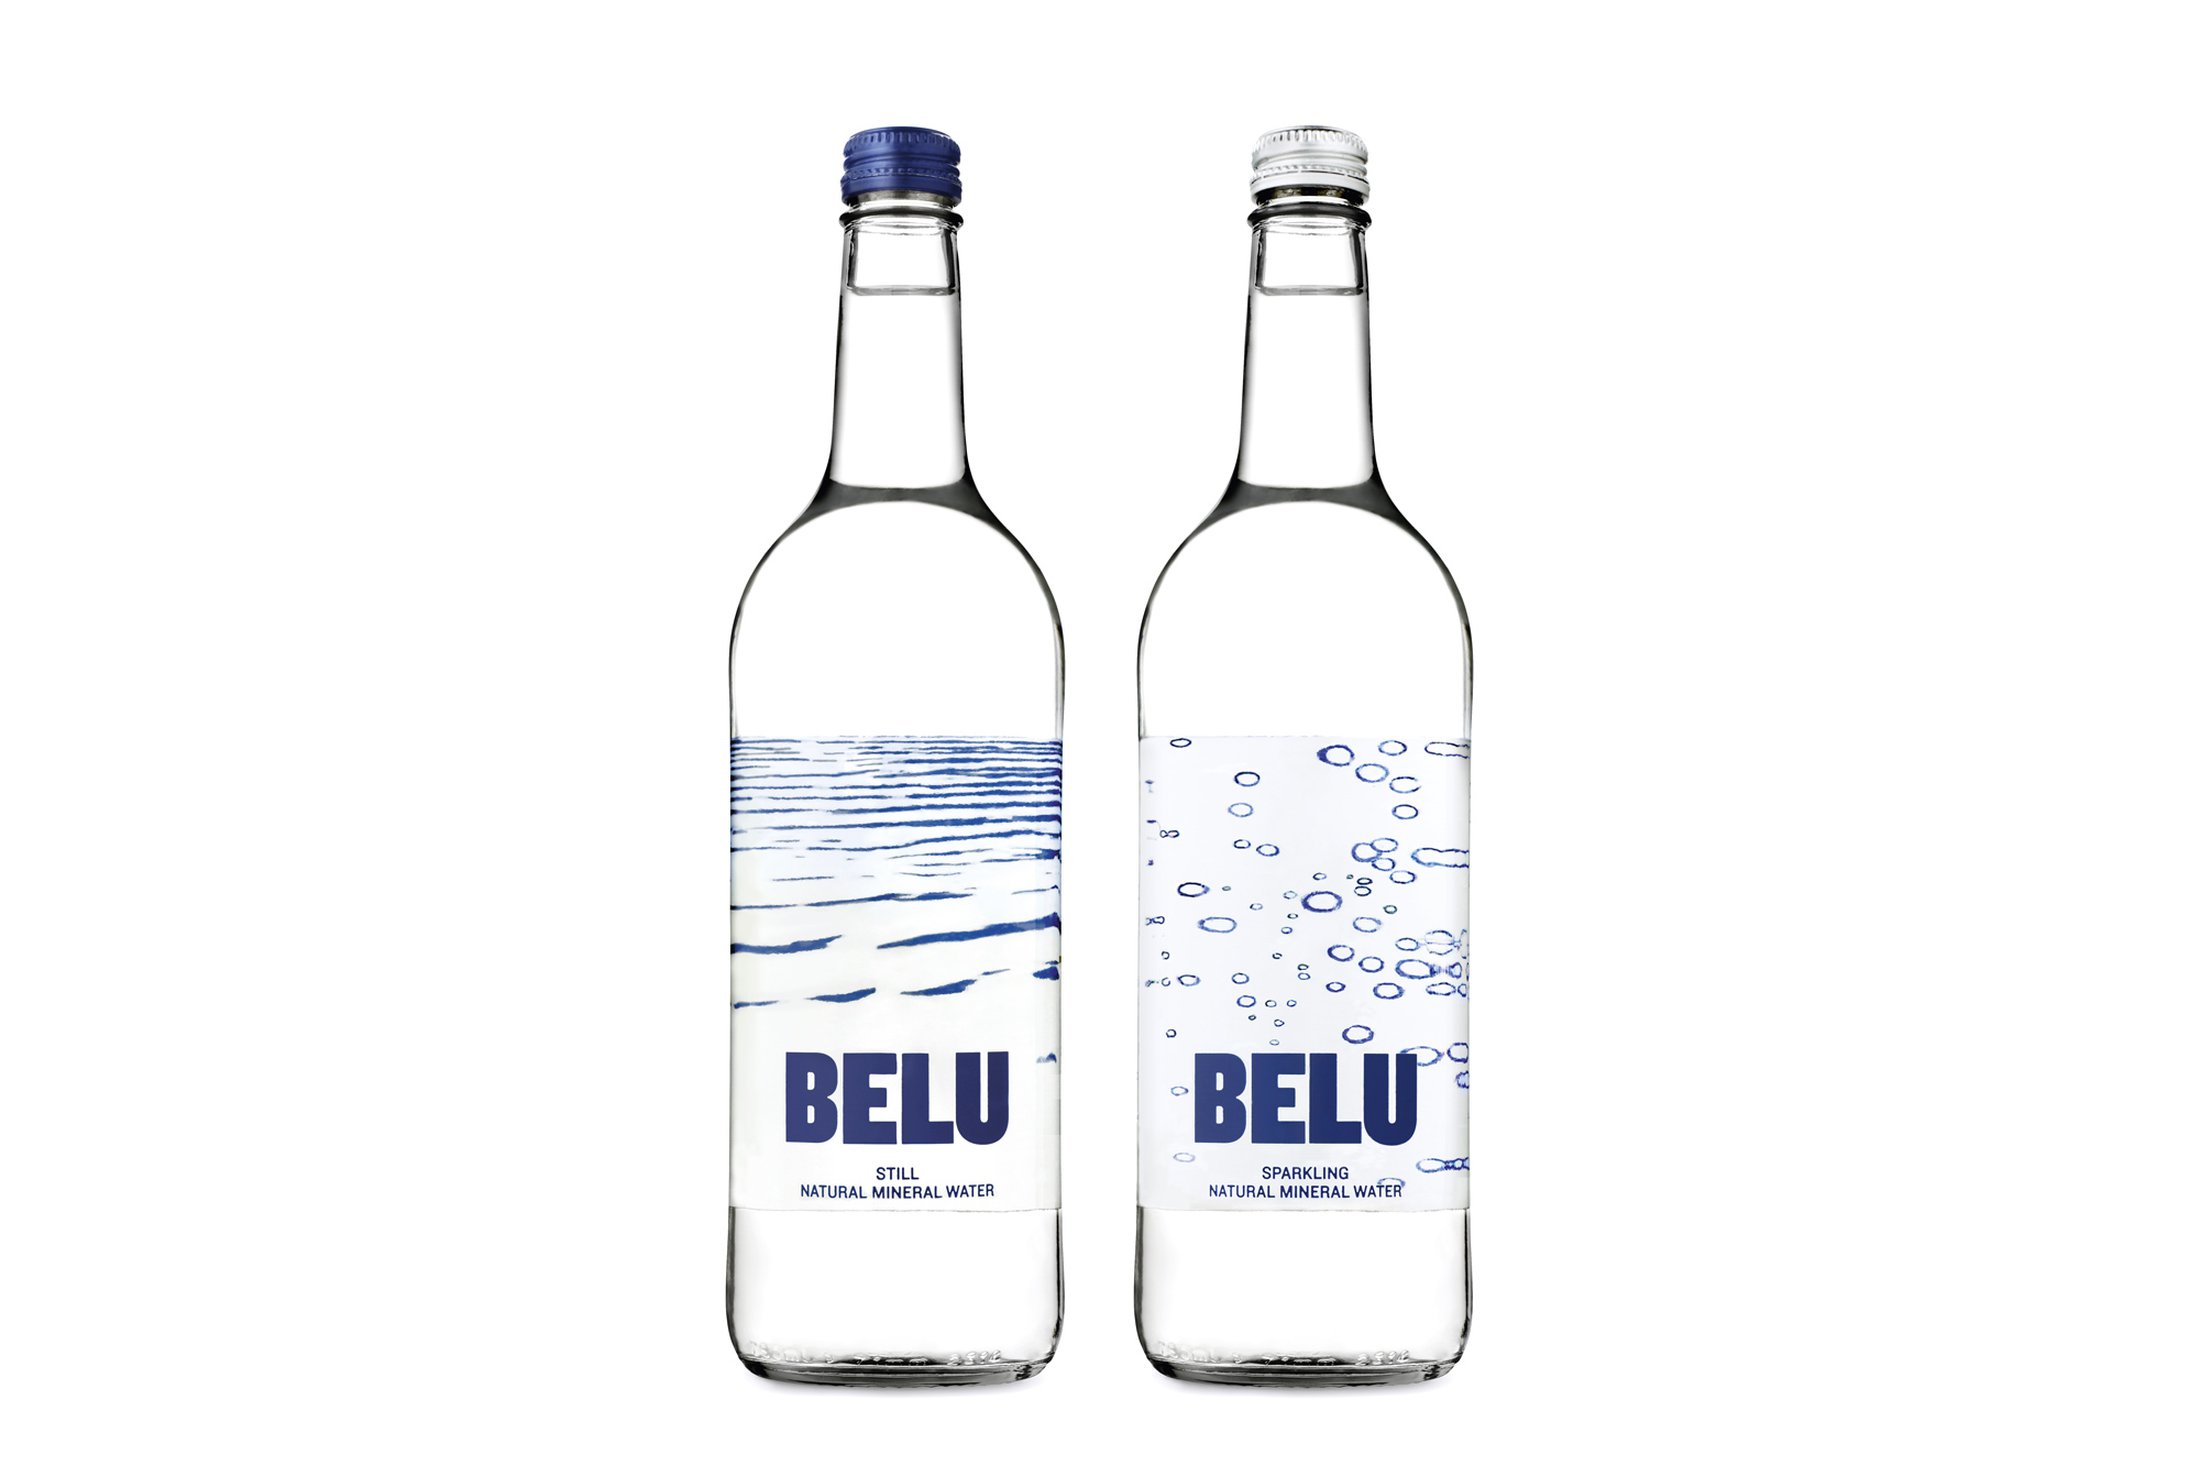 Branding and packaging for ethical water brand Belu.